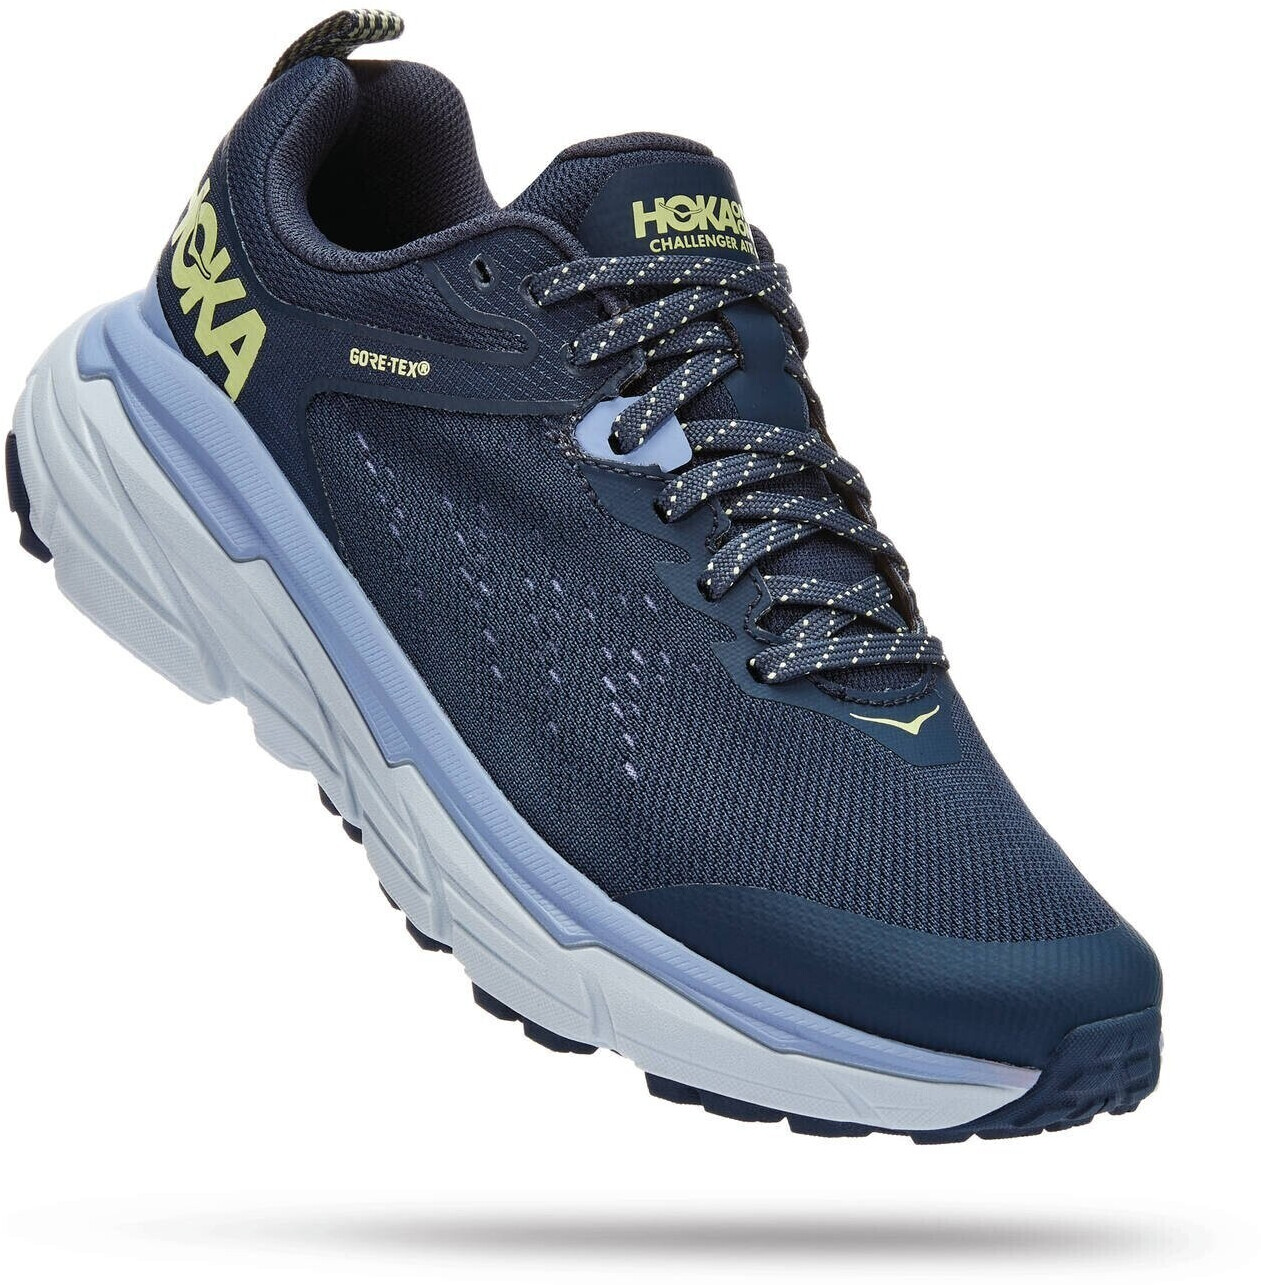 Image of Hoka One One Challenger ATR 6 GTX Women outer space/arctic ice